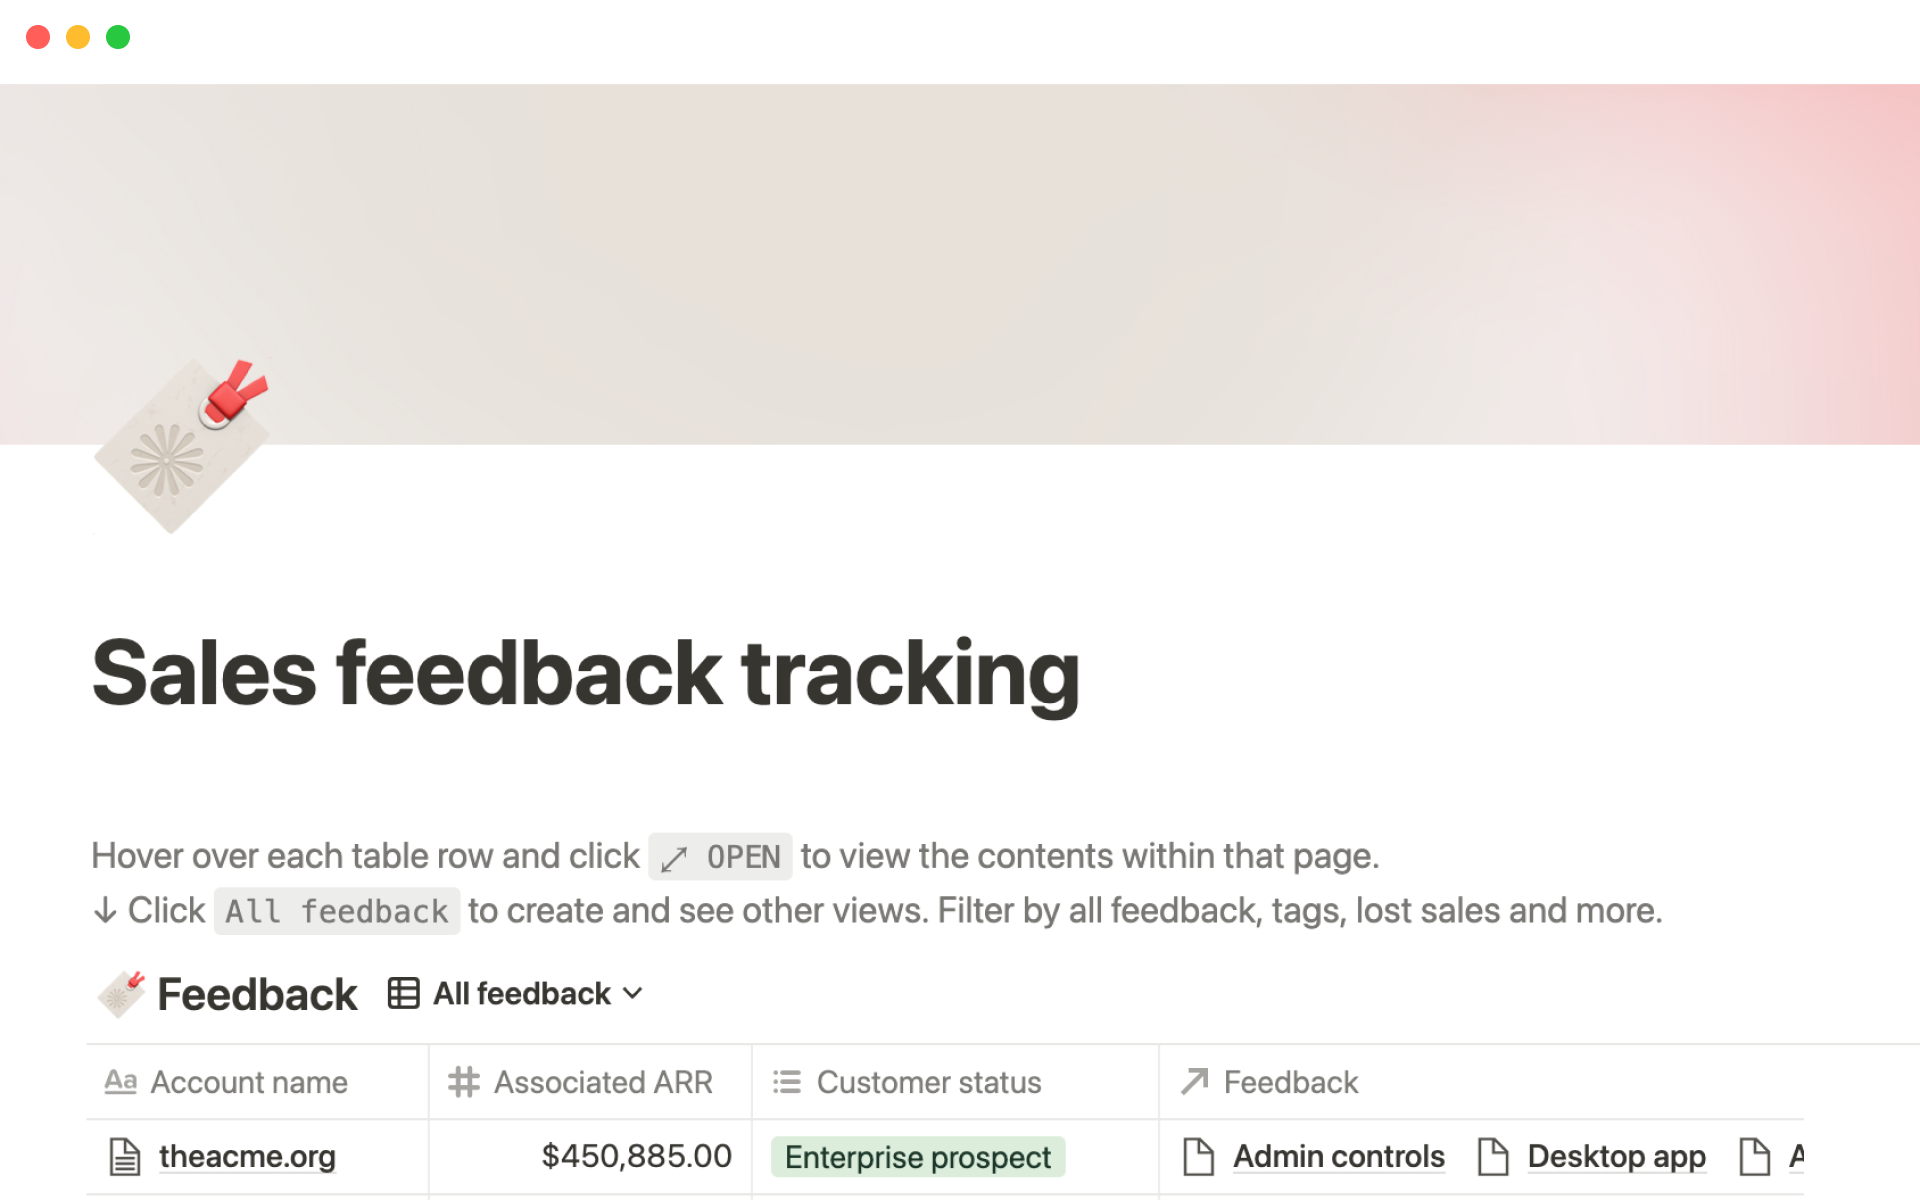 Track feedback from major customers to easily communicate with your team about which features are most important.